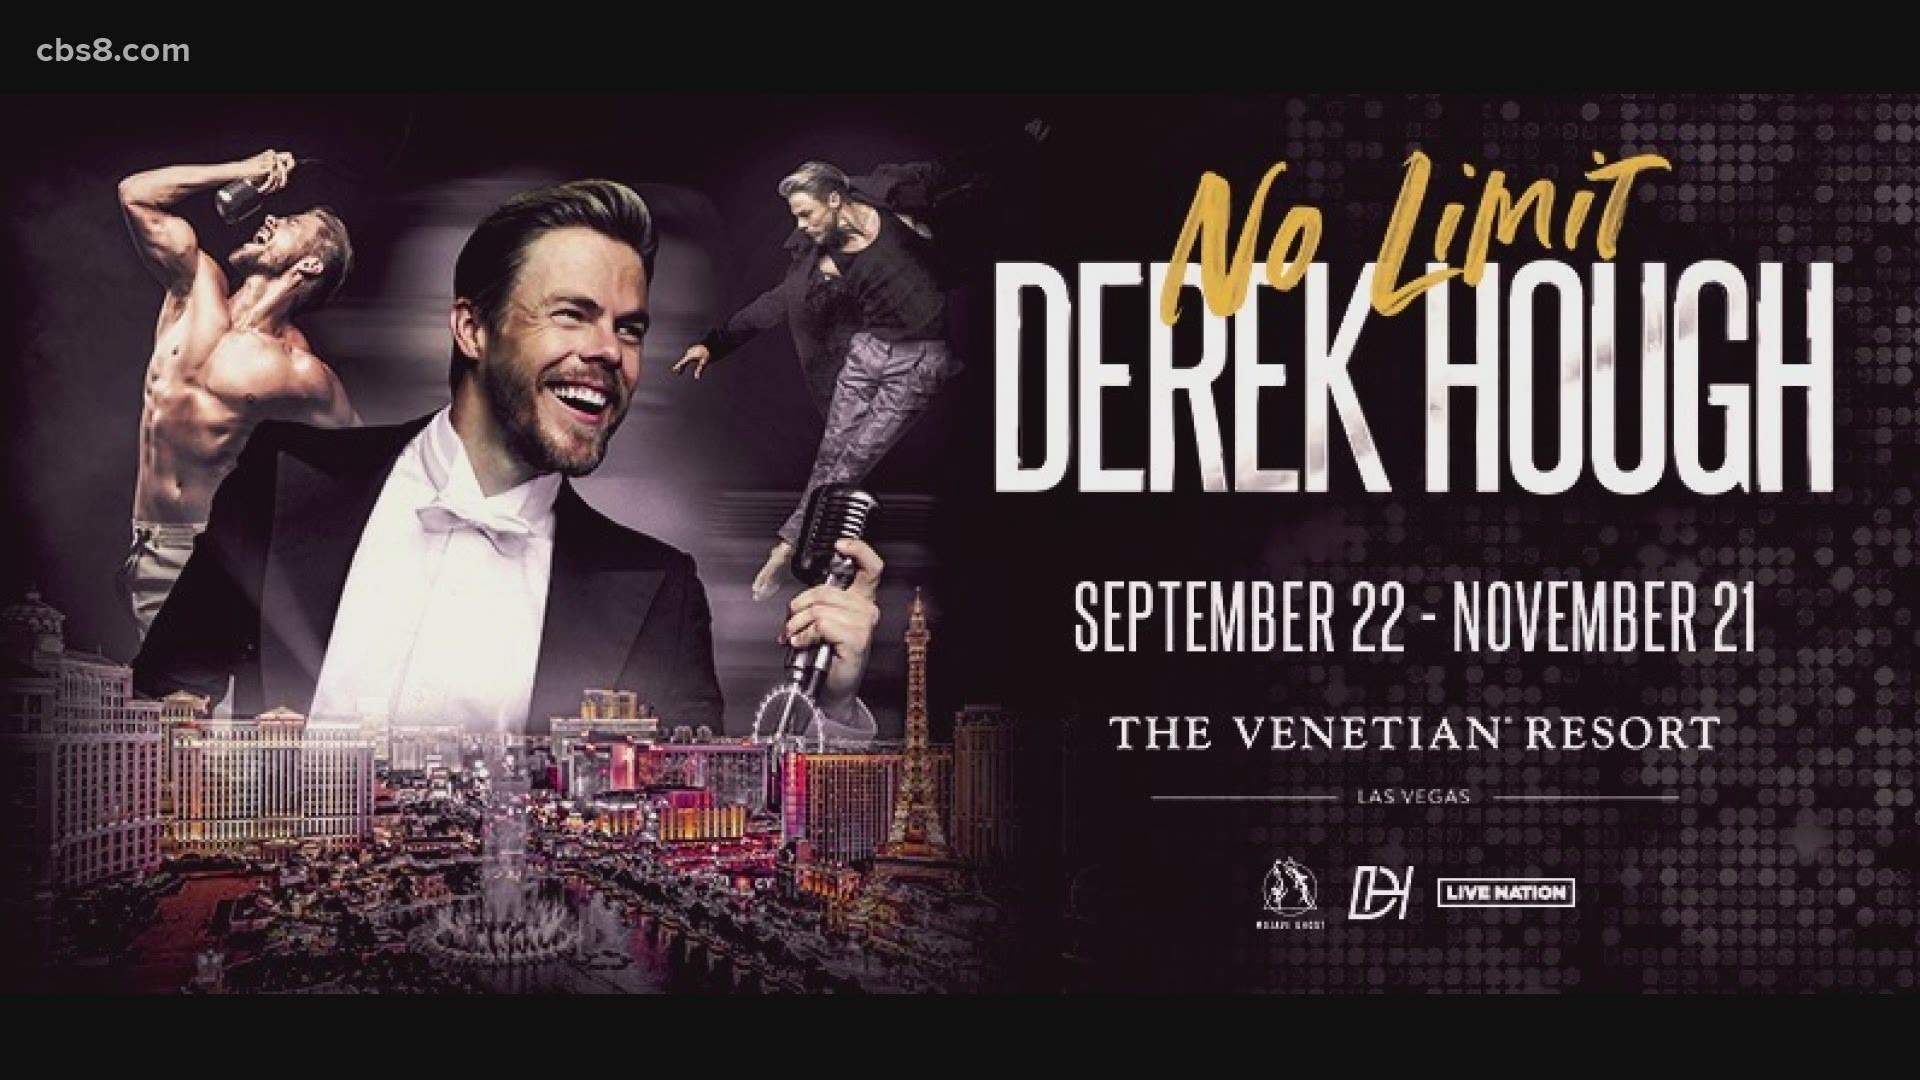 Derek Hough joined Morning Extra to talk about his new Las Vegas show. He touches on how he will continue to do Dancing With the Stars while having a Vegas show.